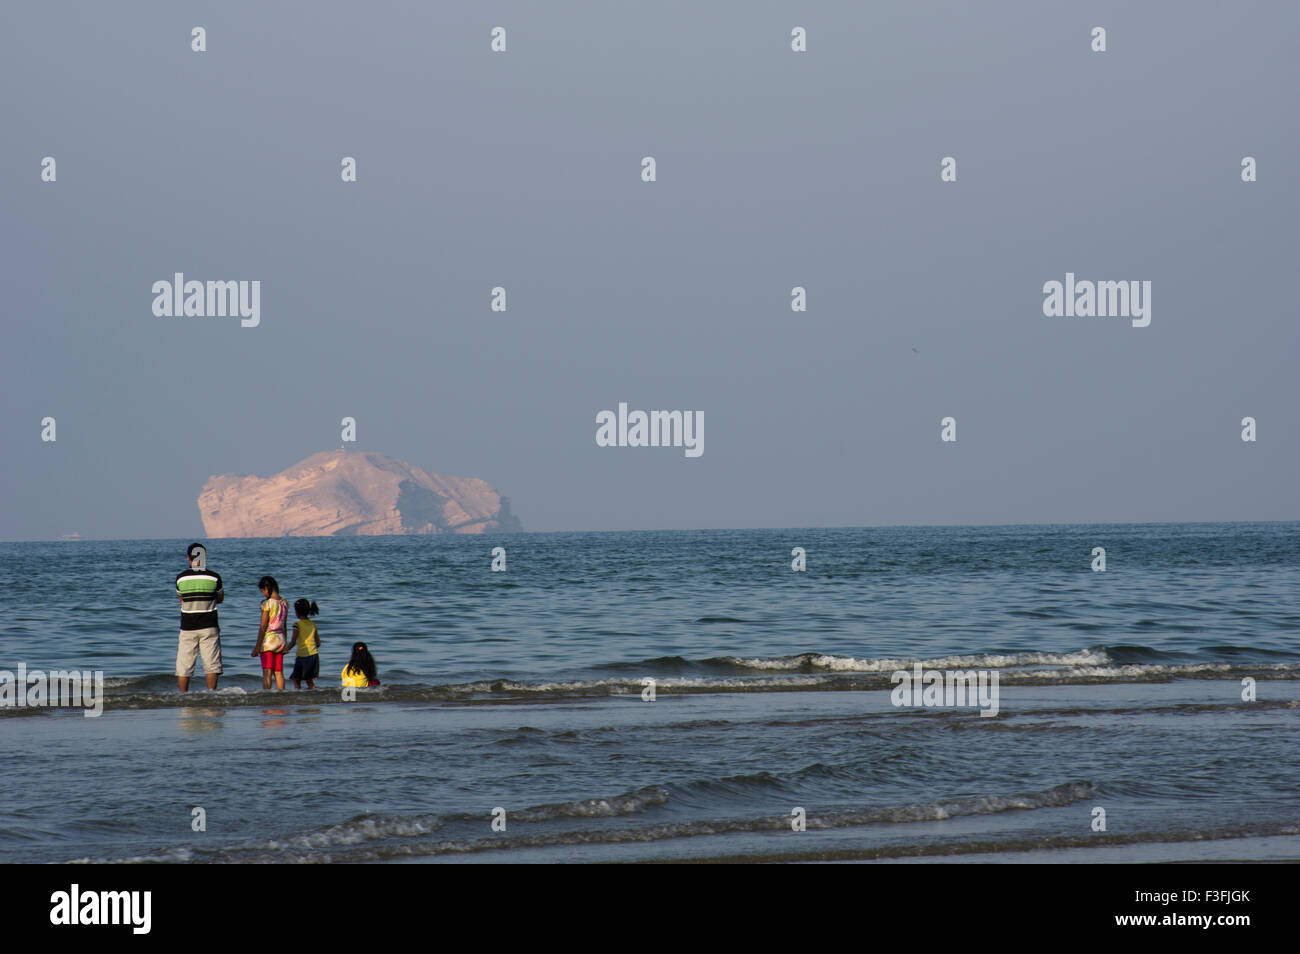 A family looks out across the Gulf of Oman in Muscat in the Sultanate of Oman, a safe, friendly Gulf State holiday destination Stock Photo